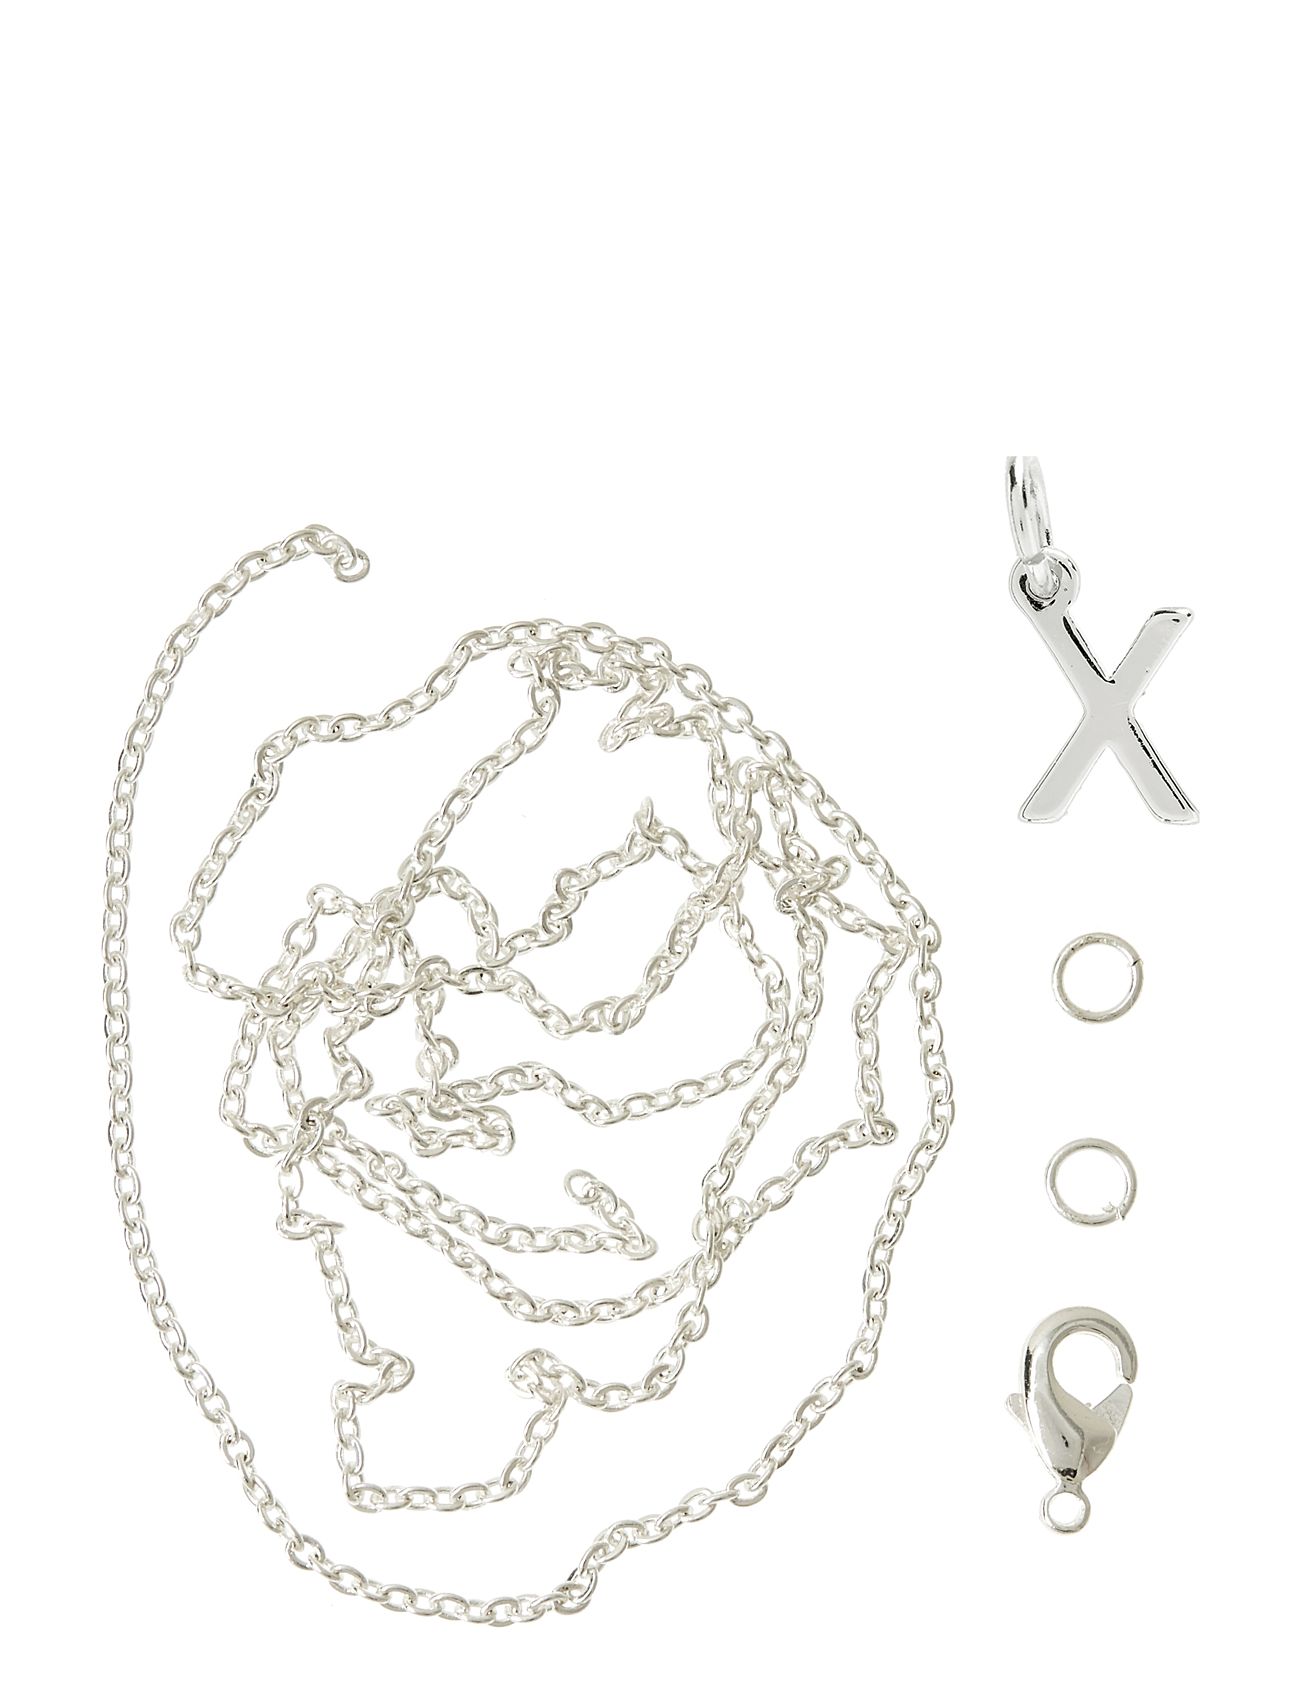 Letter X Sp With O-Ring, Chain And Clasp Toys Creativity Drawing & Crafts Craft Jewellery & Accessories Silver Me & My Box